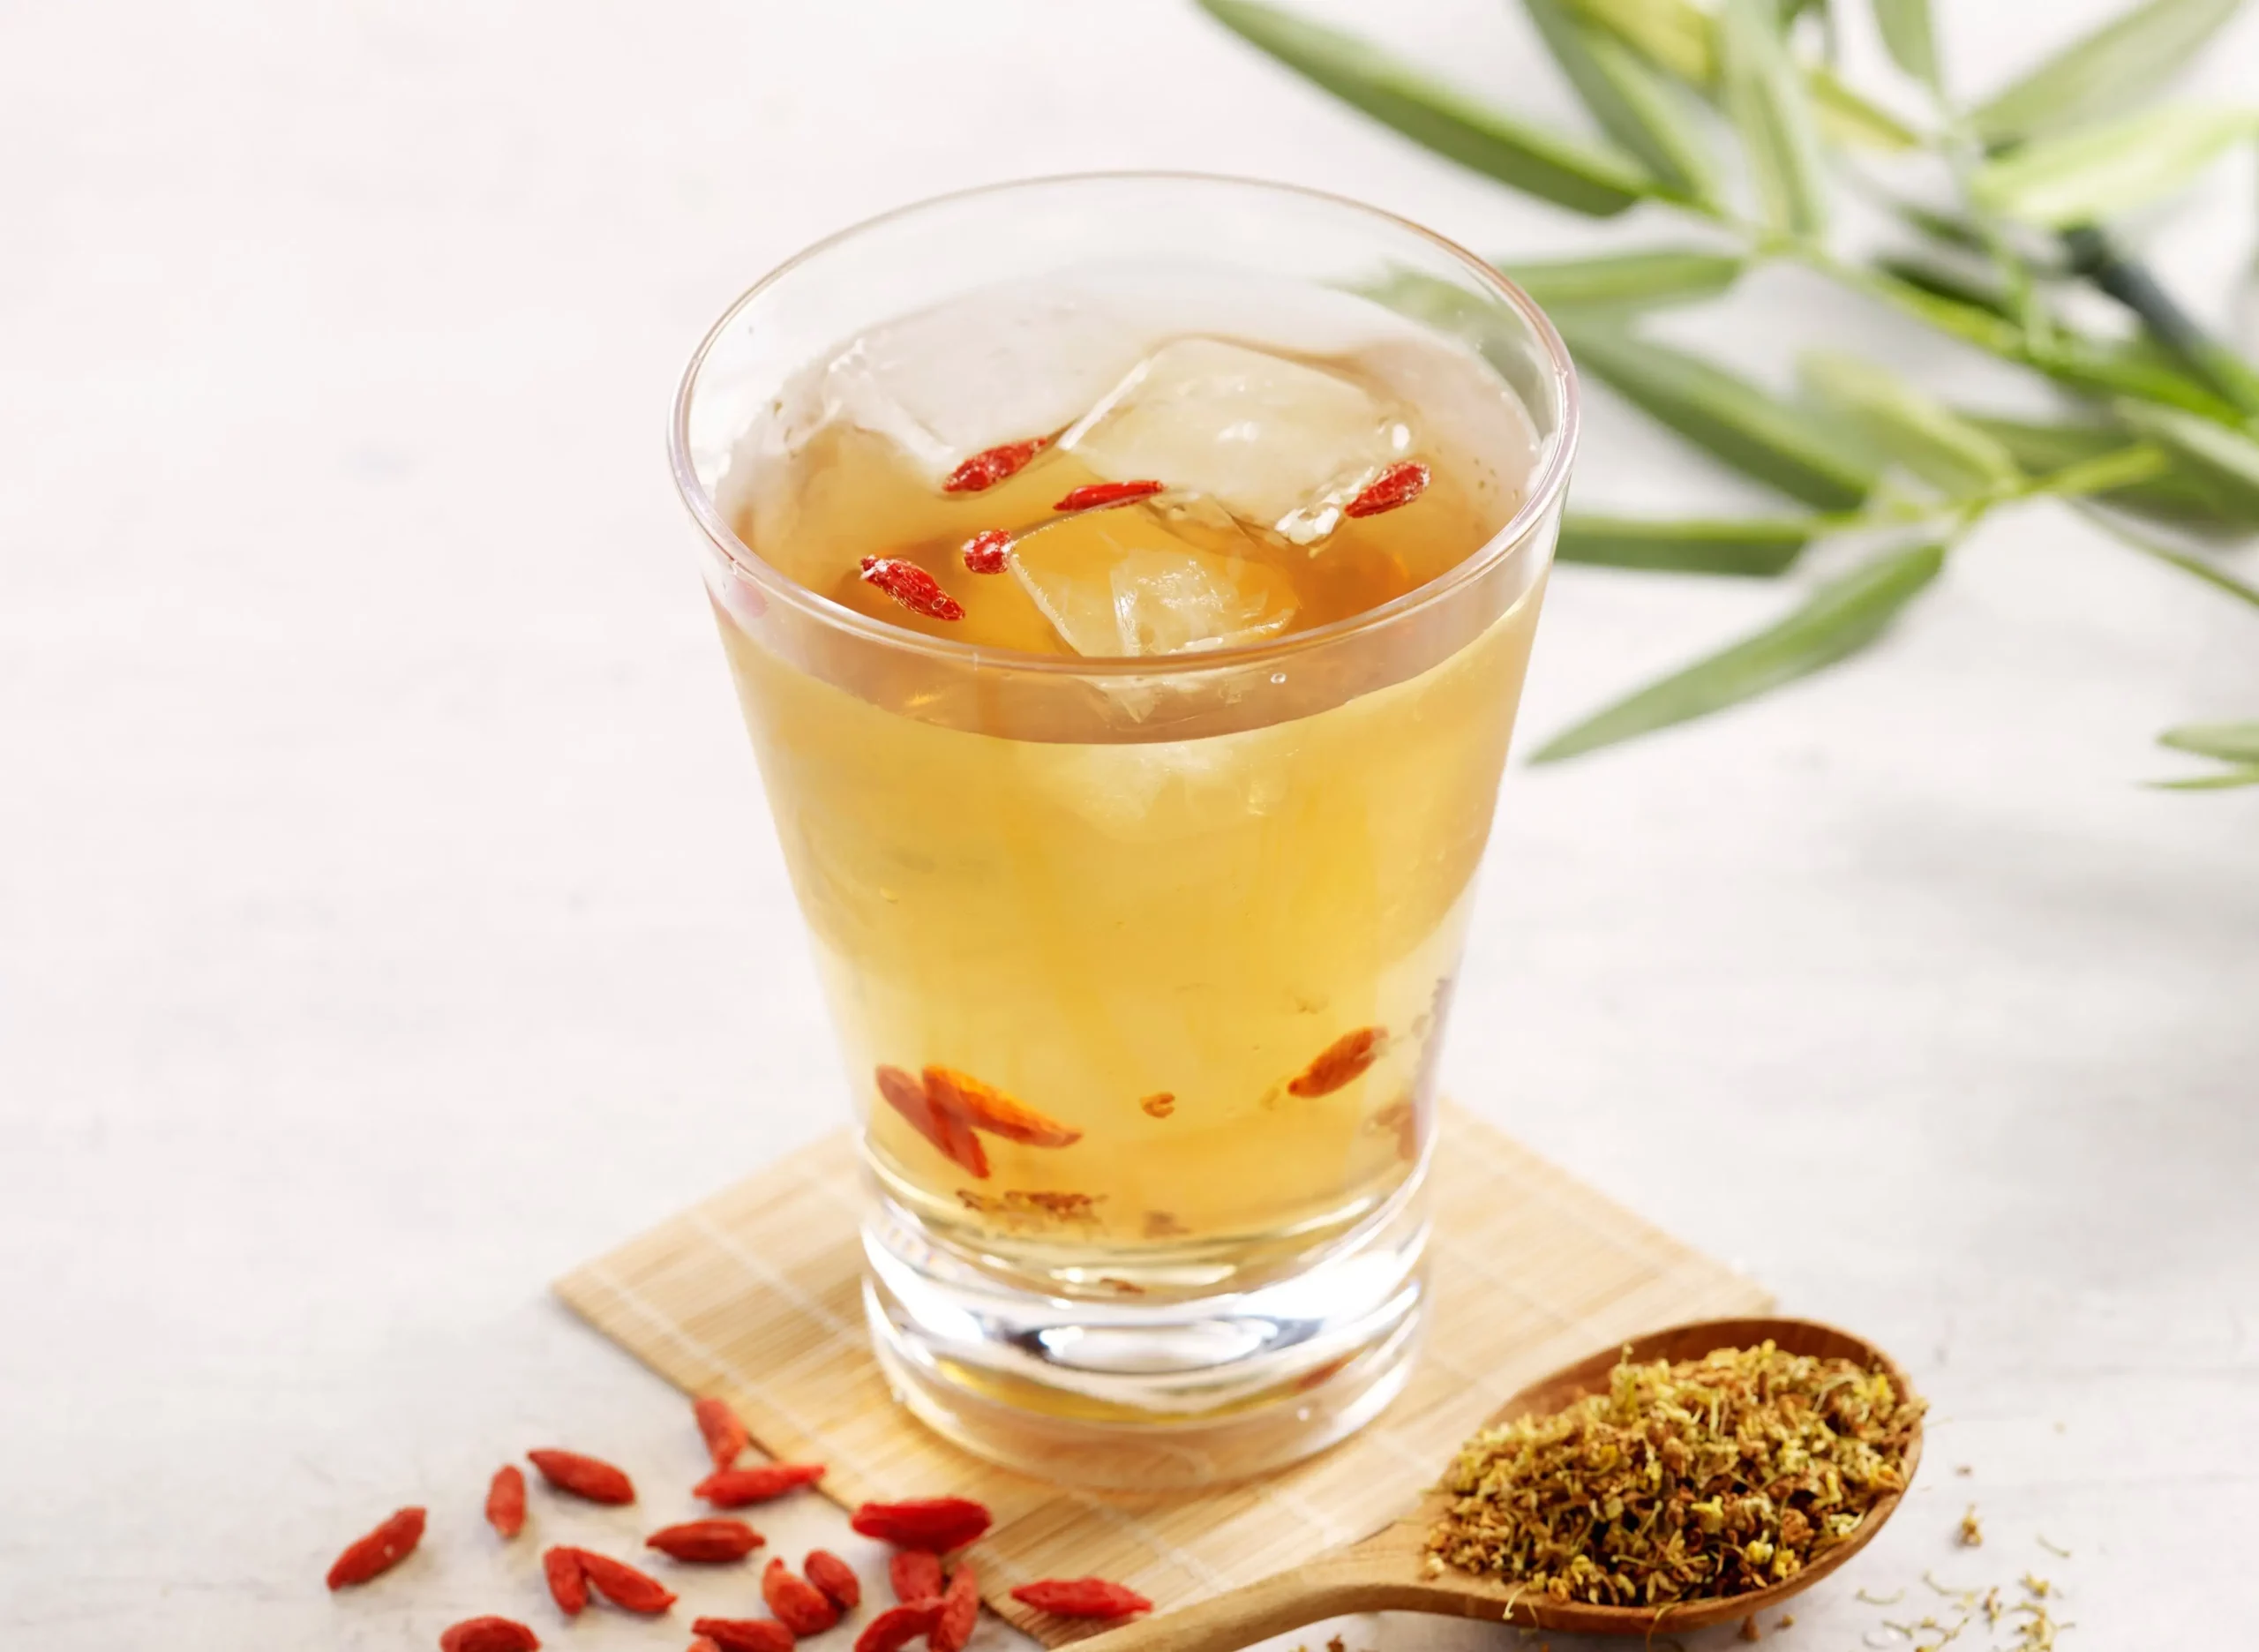 Winter Melon Chilled Tea with Osmanthus Jelly